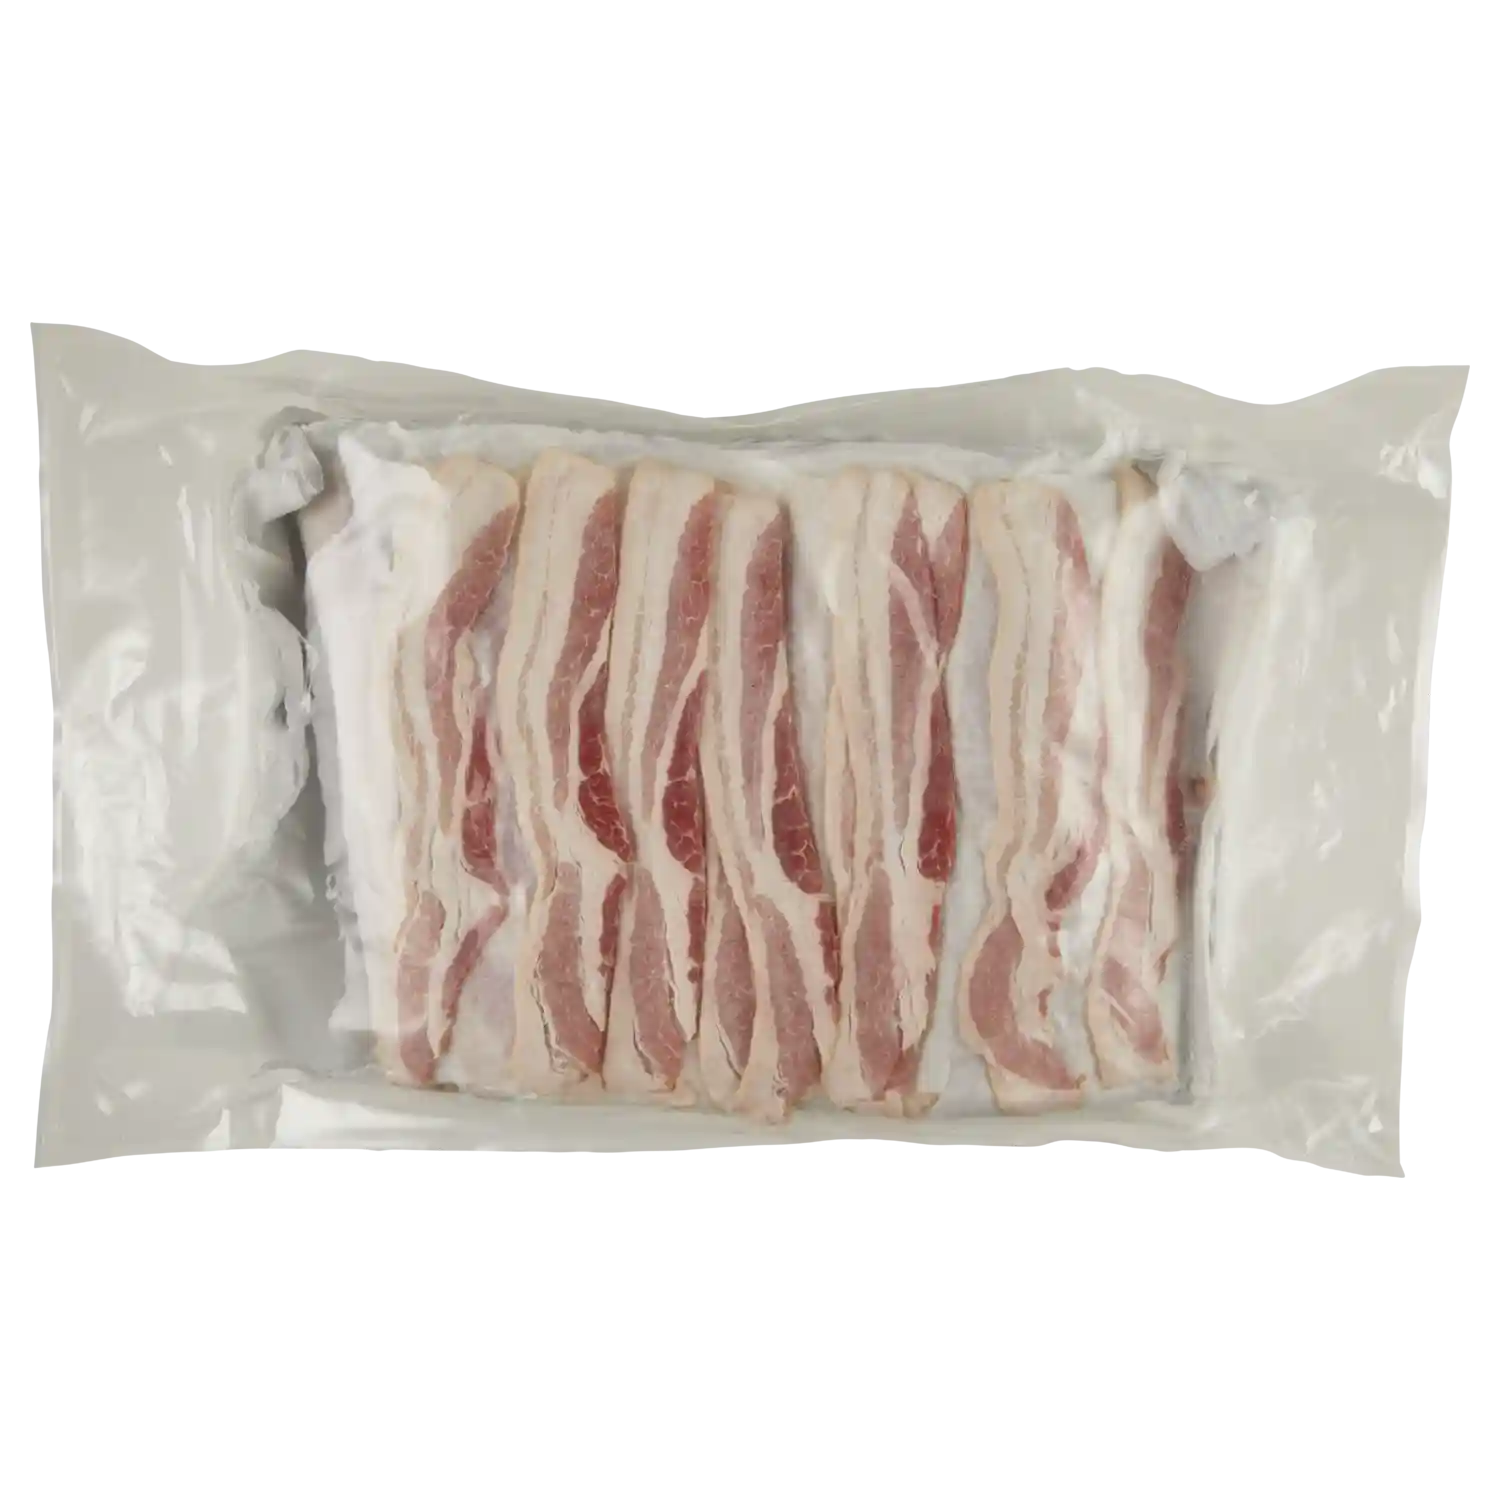 Wright® Brand Naturally Applewood Smoked Thick Sliced Bacon, Flat-Pack®, 15 Lbs, 10-14 Slices Per Pound, Gas Flushed_image_31